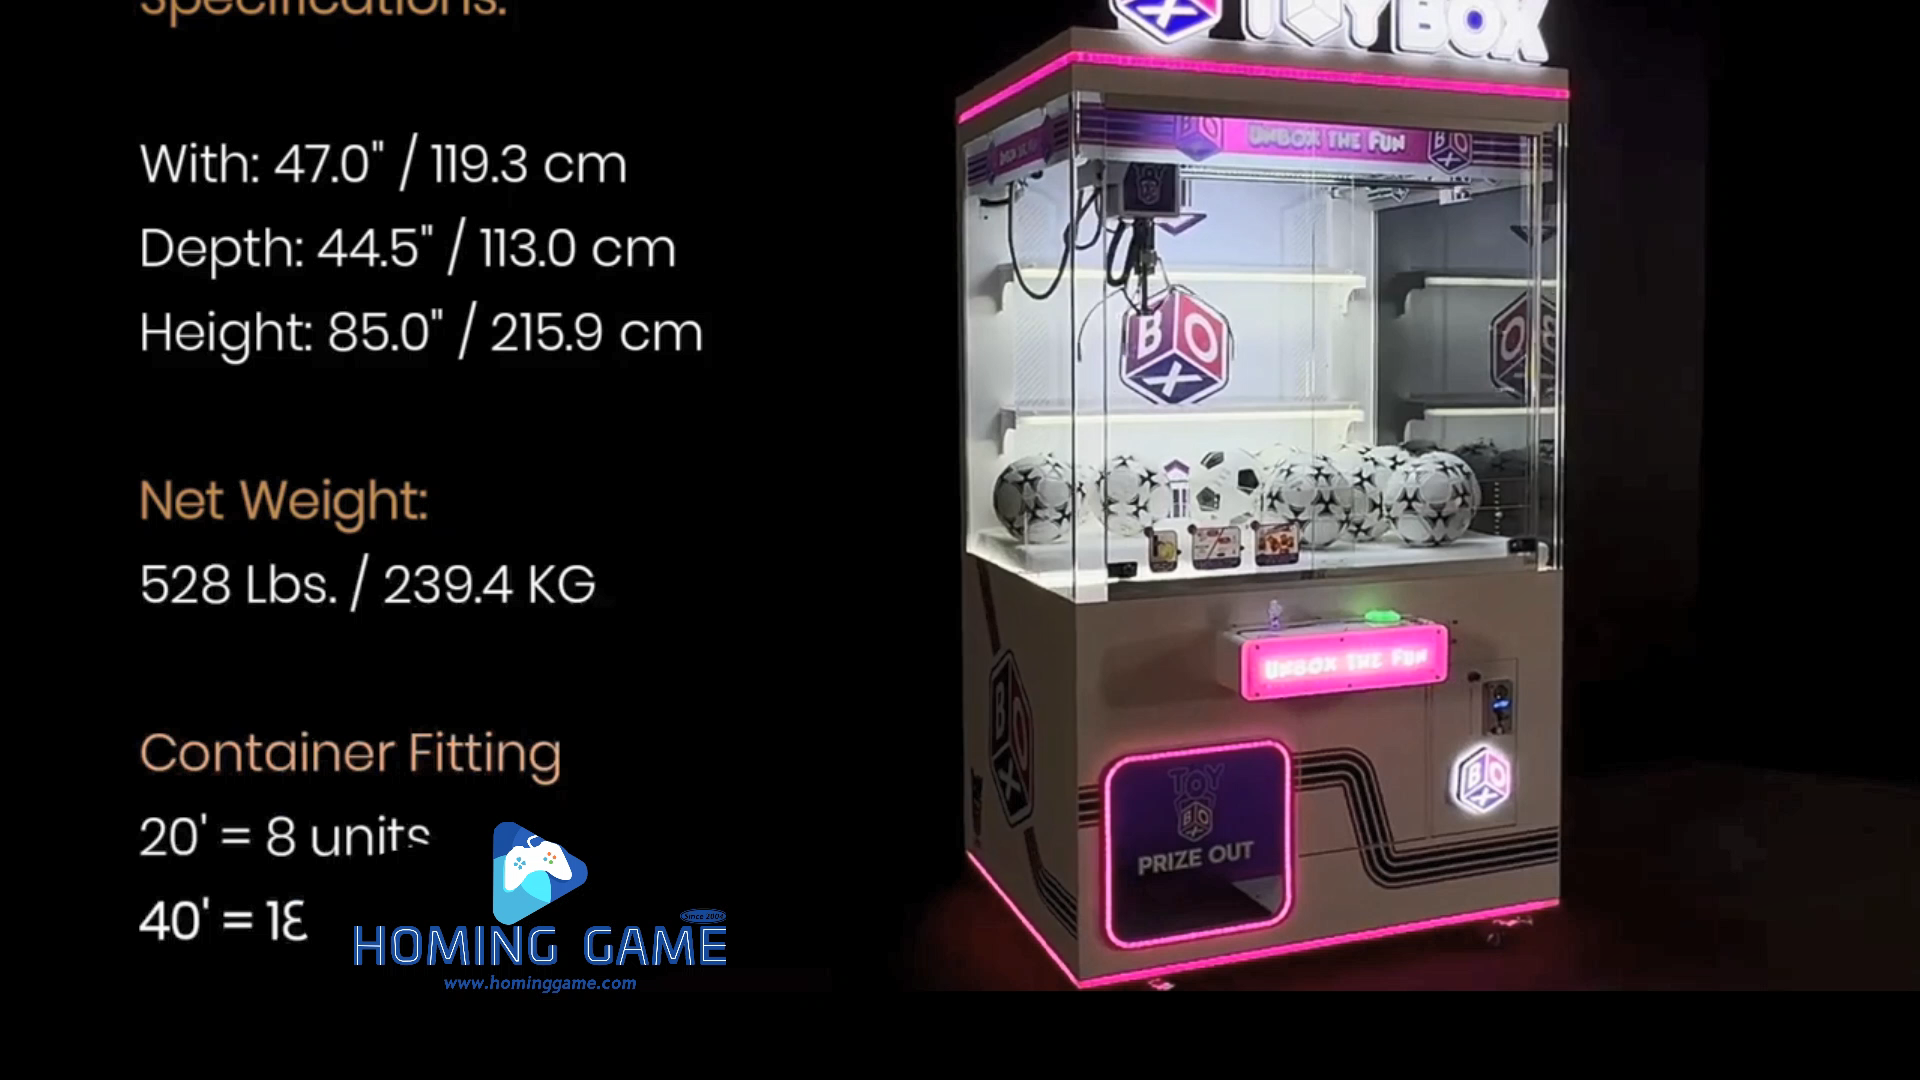 Unbox the Ultimate Fun with HomingGame's New ToyBox XL Crane Game Machine! #CraneGame #ClawMachine